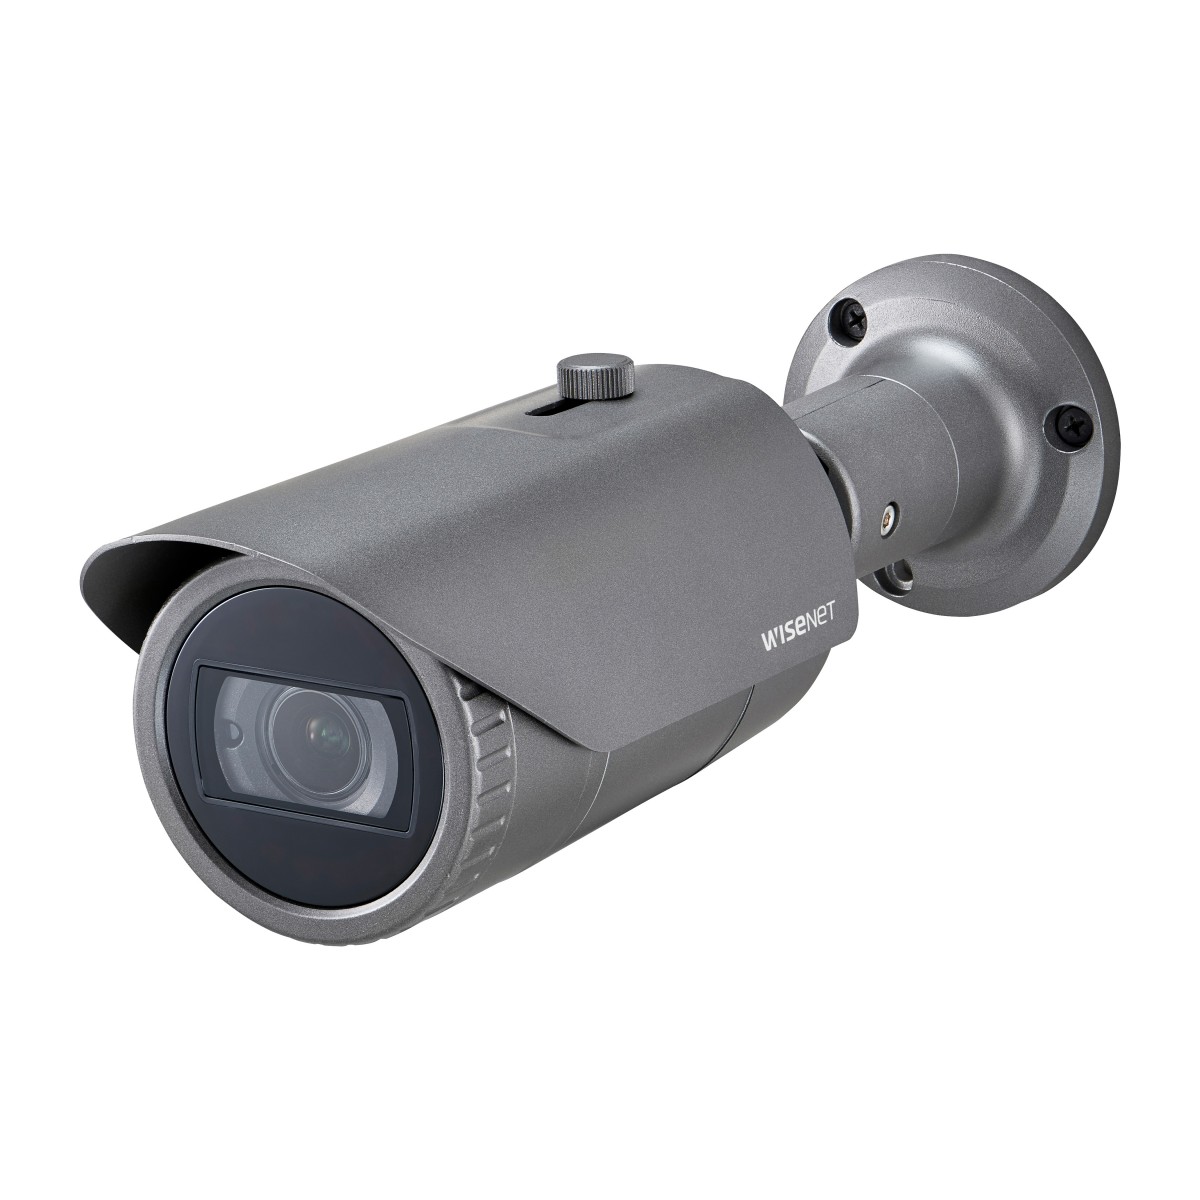 Hanwha Techwin Hanwha QNO-6082R - IP security camera - Outdoor - Wired - Bullet - Ceiling/wall - Grey